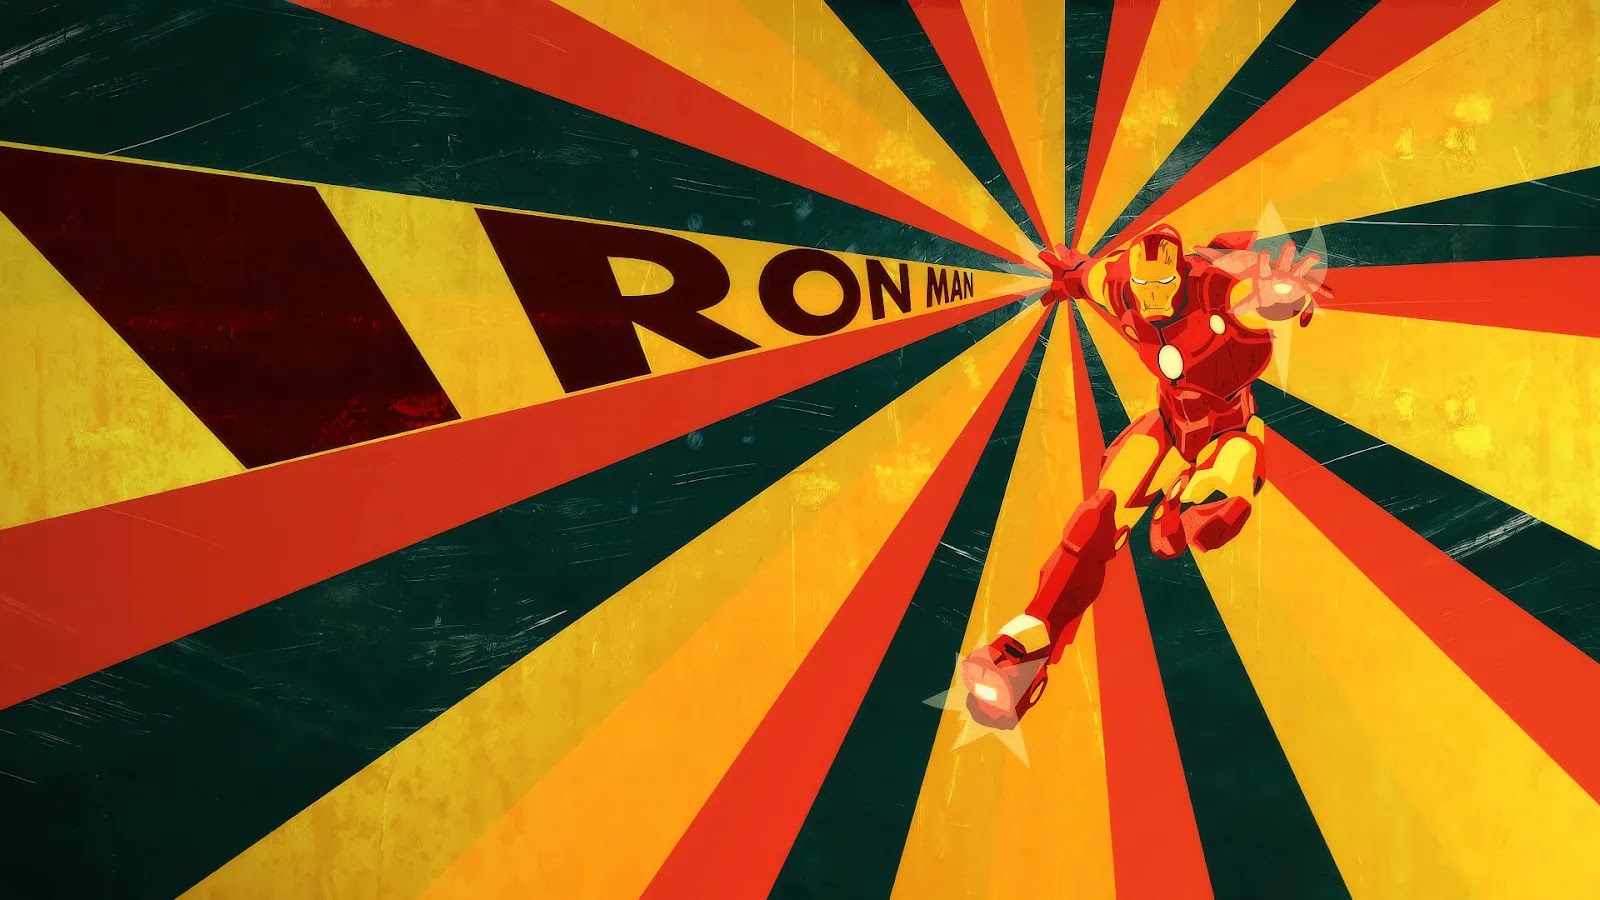 Stylized artwork of a superhero Ironman from Marvel comics in a red and gold suit flying forward with dynamic, radiating background.